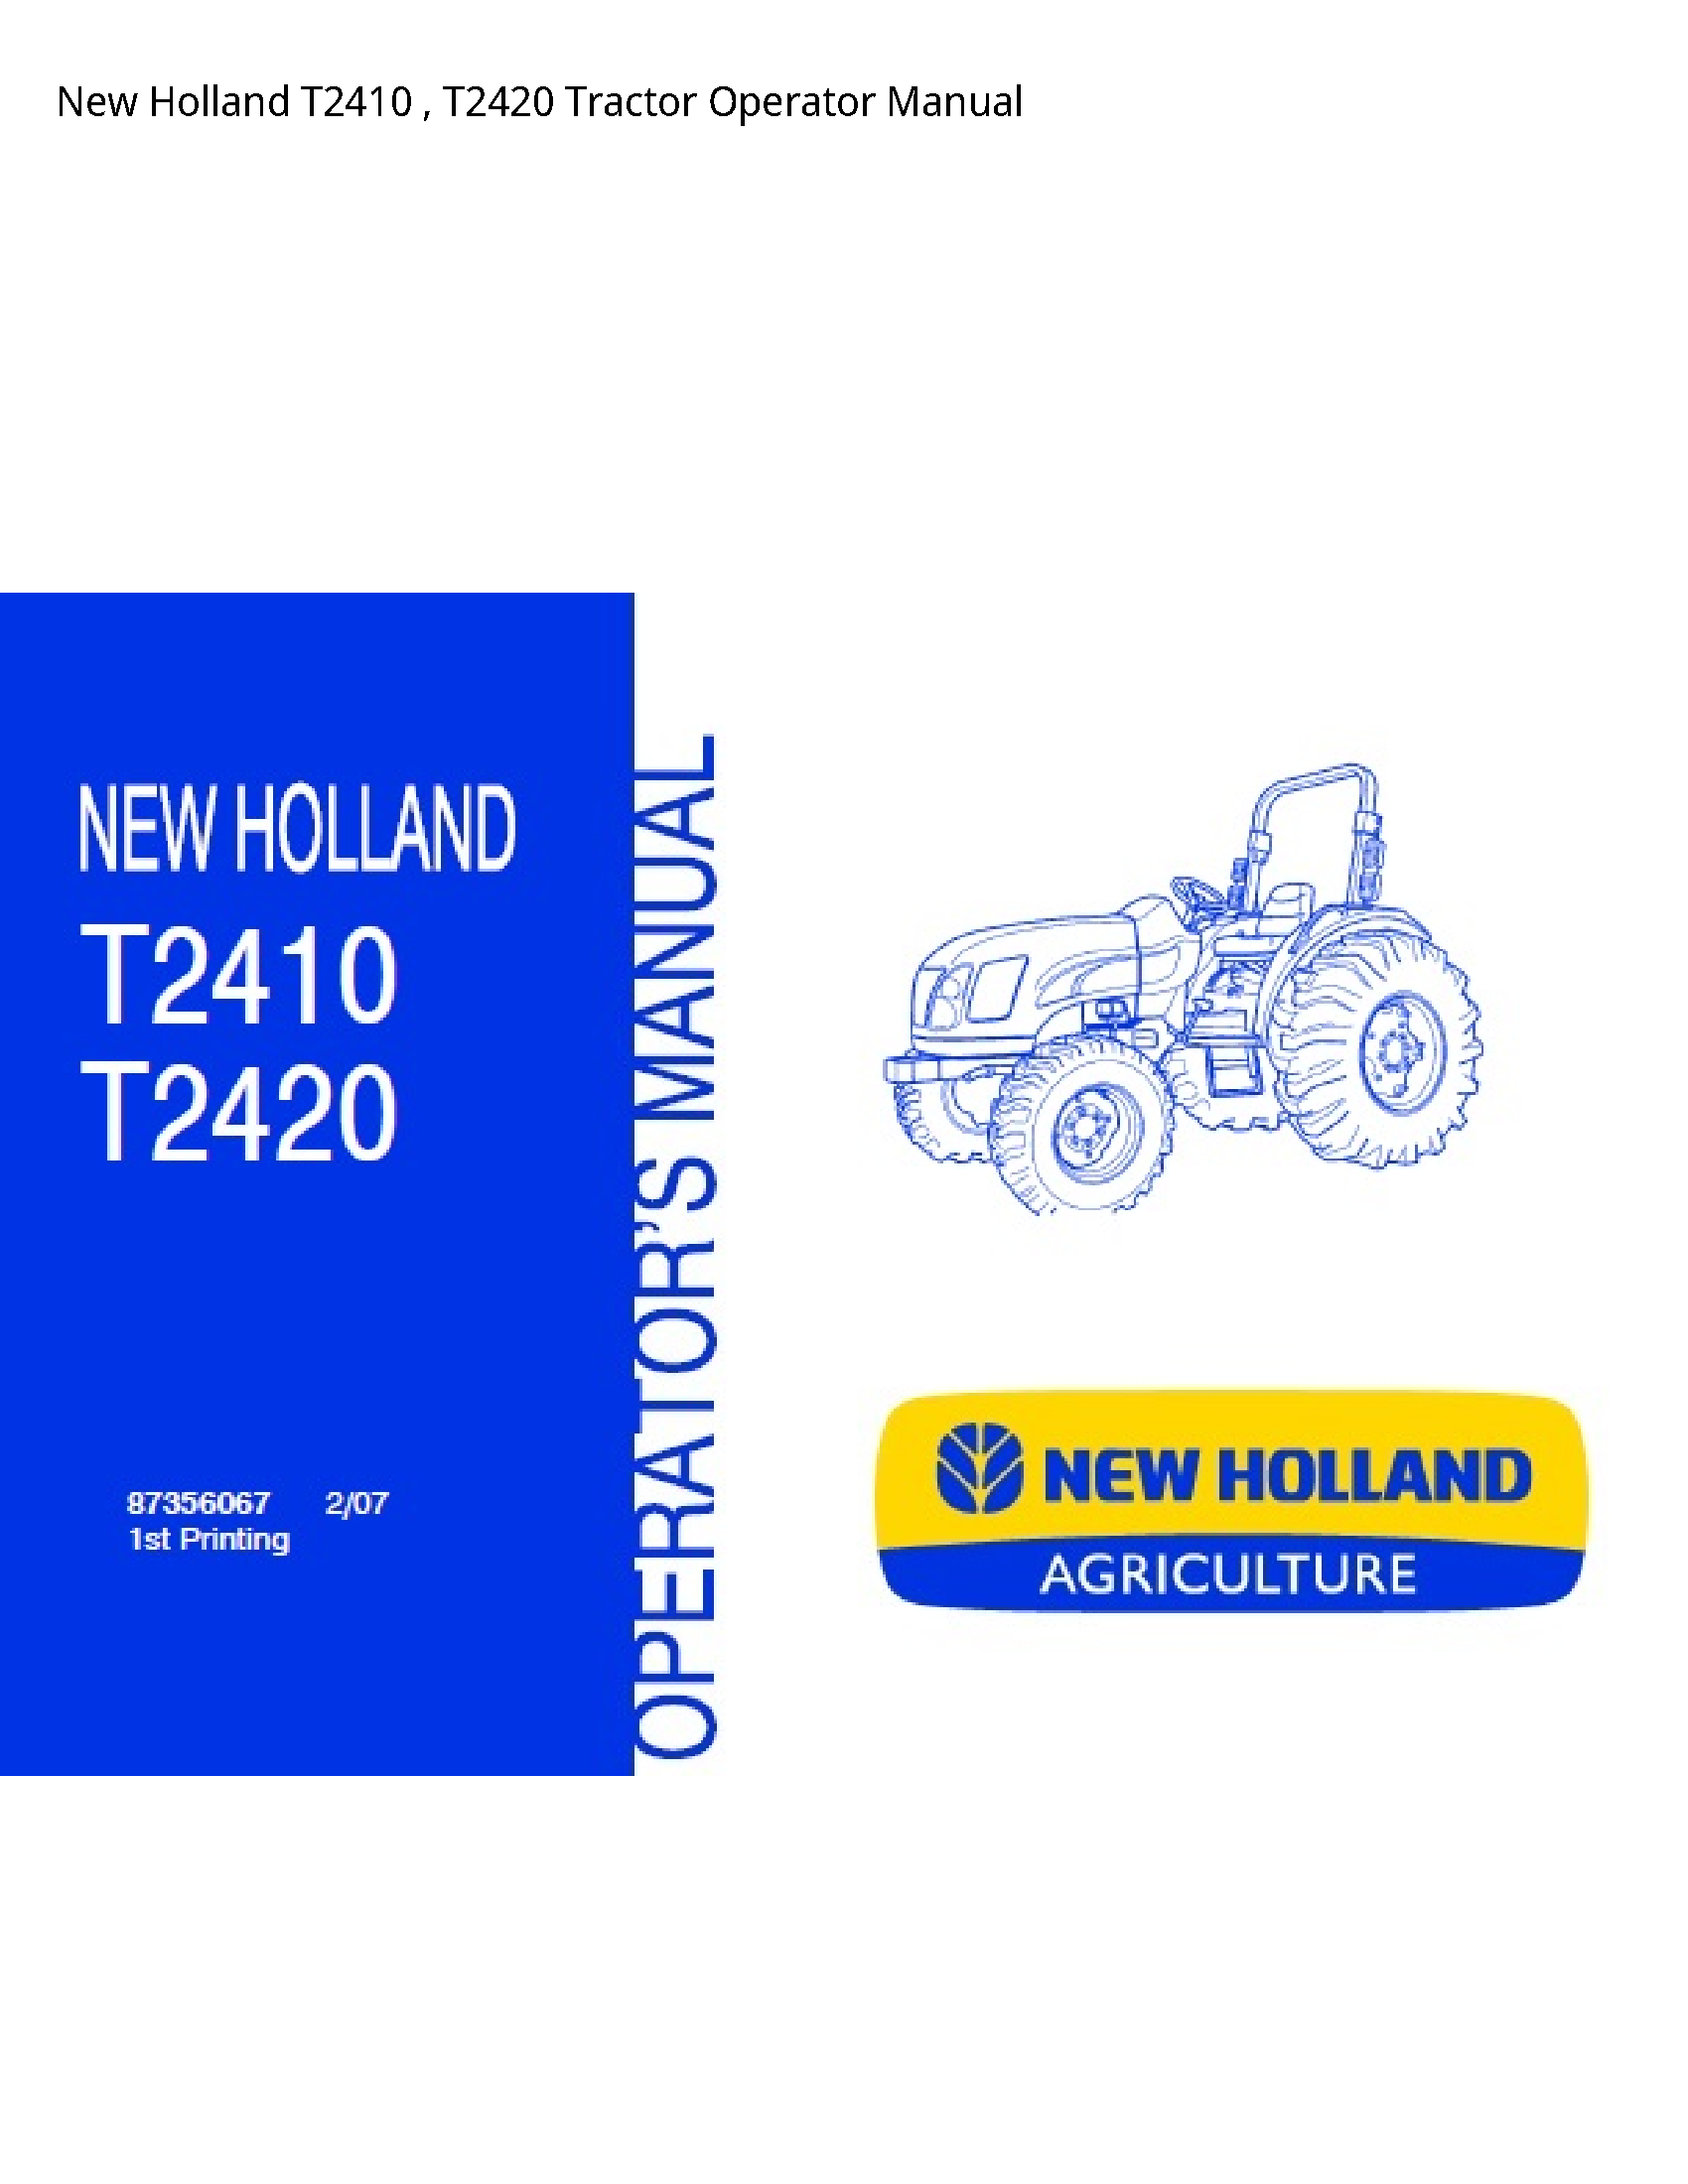 New Holland T2410 Tractor Operator manual